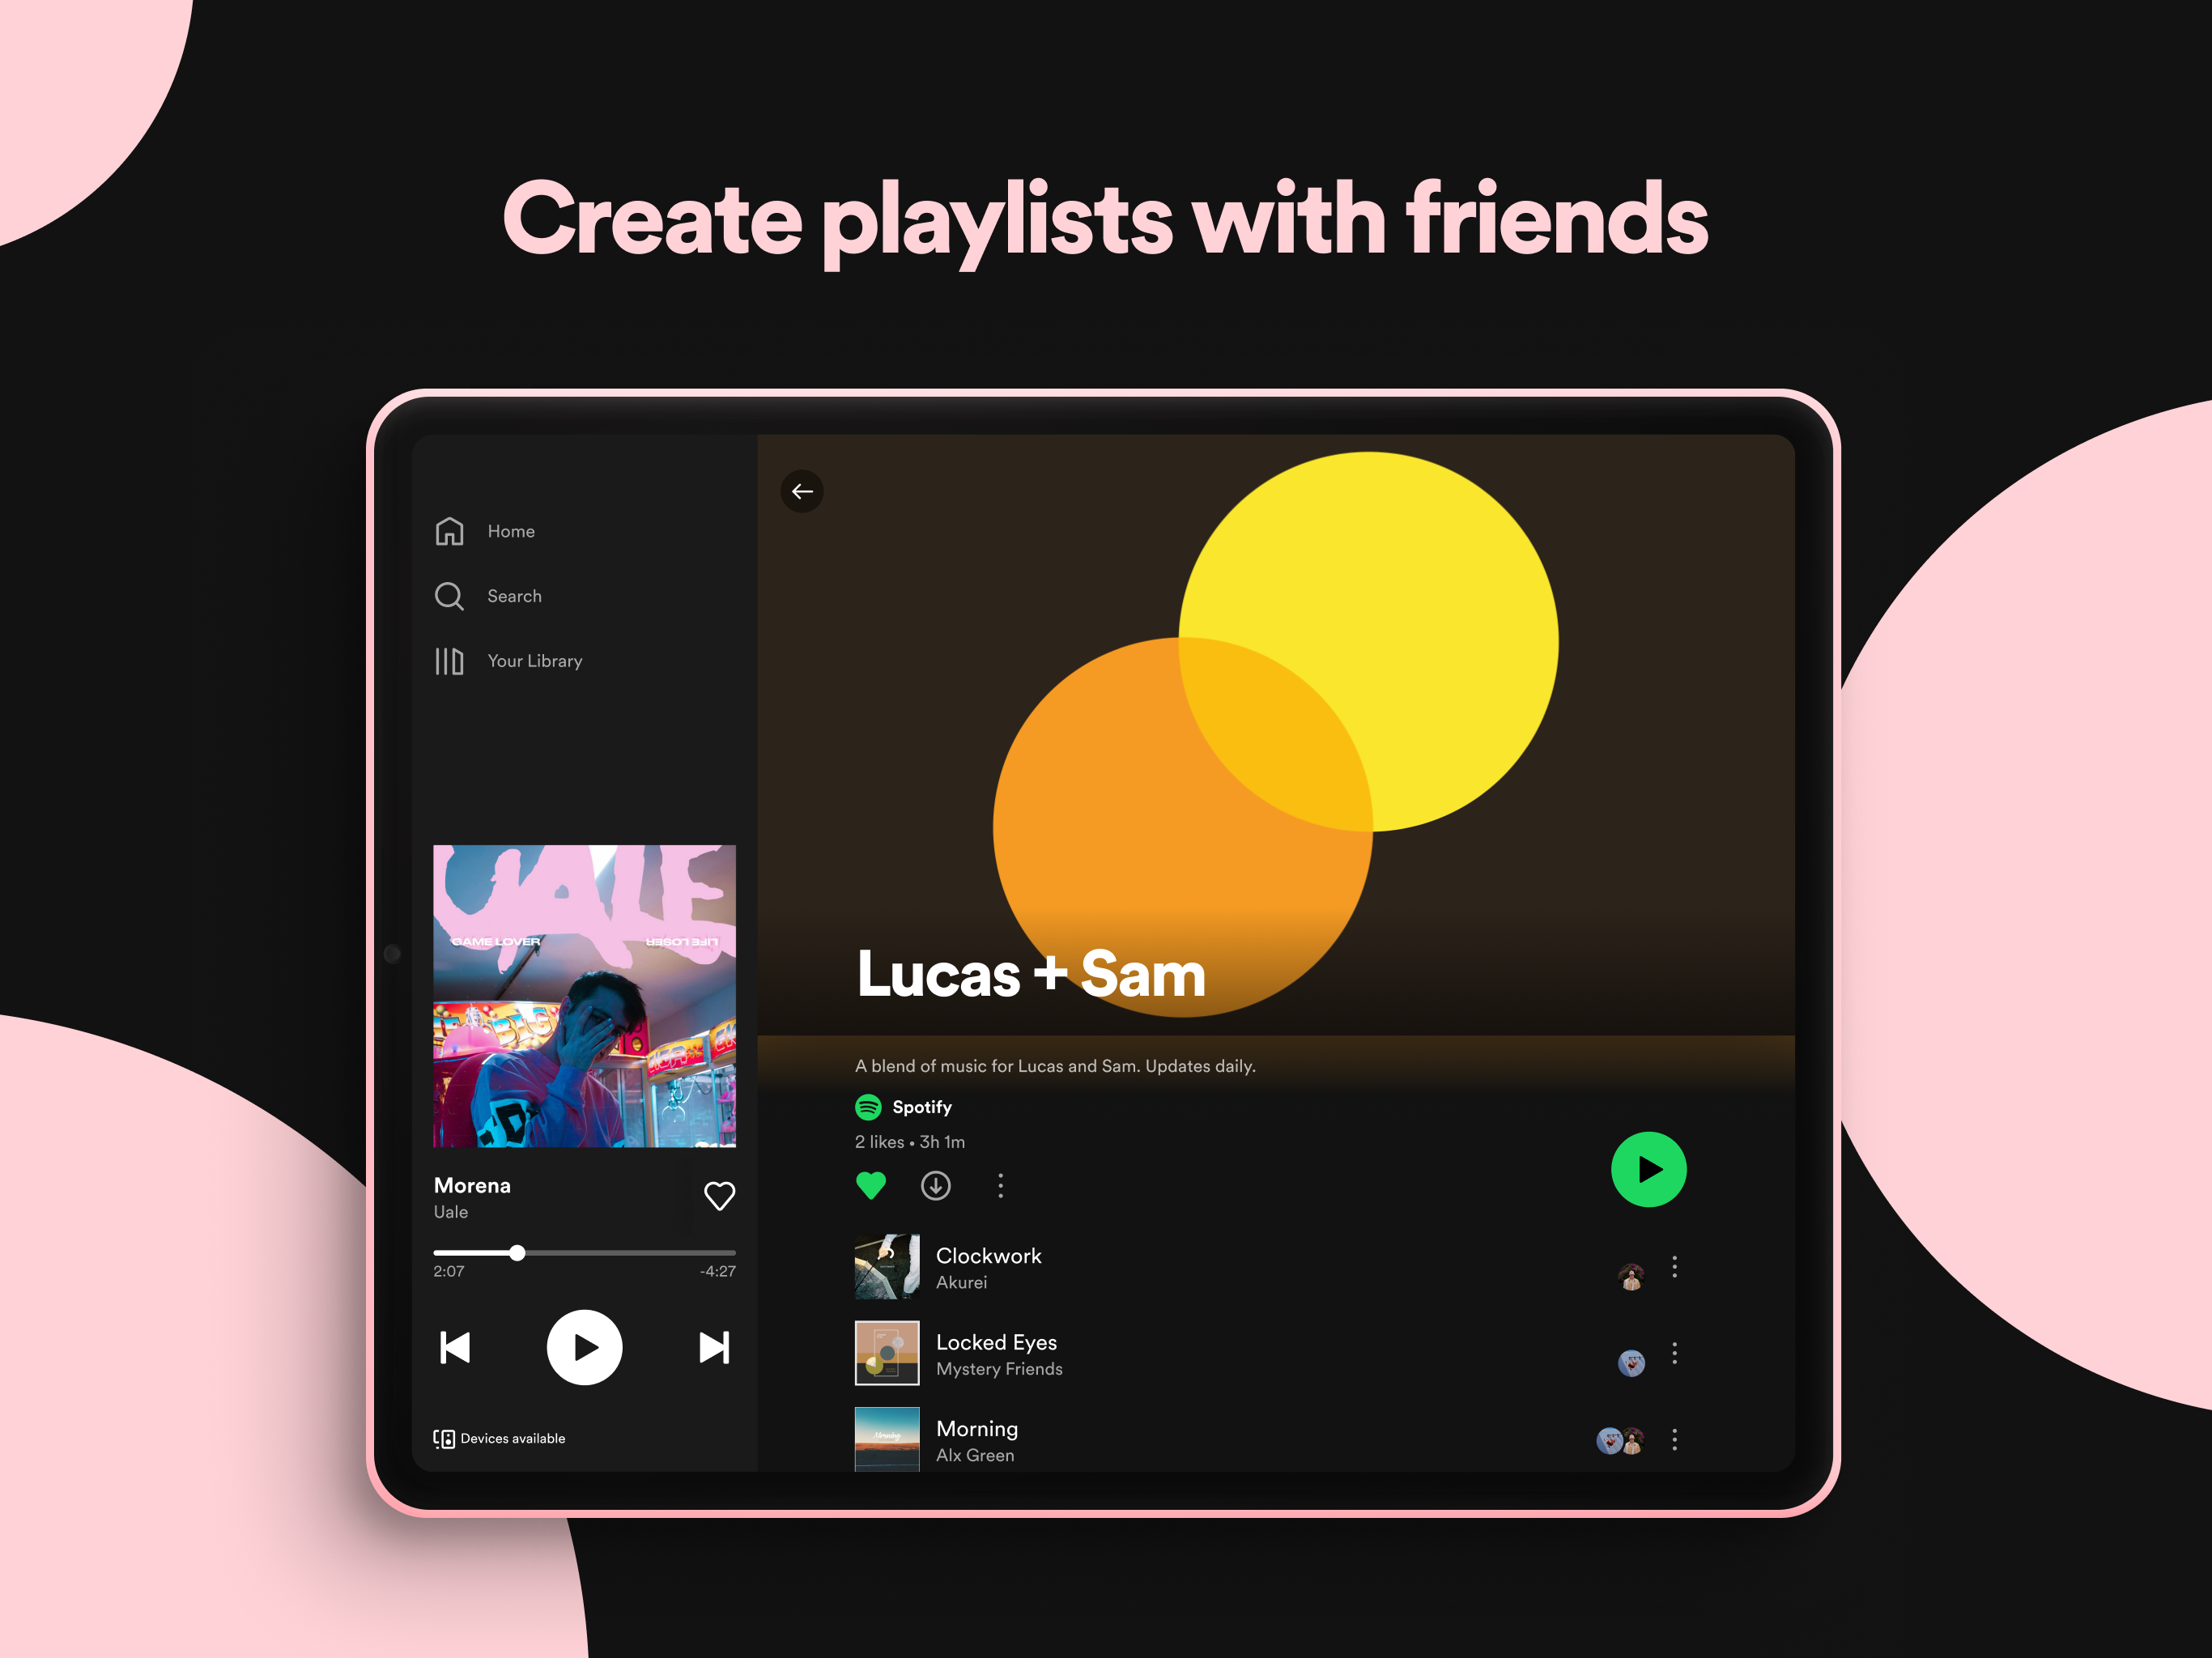 Spotify: Music, Podcasts, Lit Apk 8.8.10.582 For Android – Download Spotify:  Music, Podcasts, Lit Apk Latest Version From Apkfab.Com